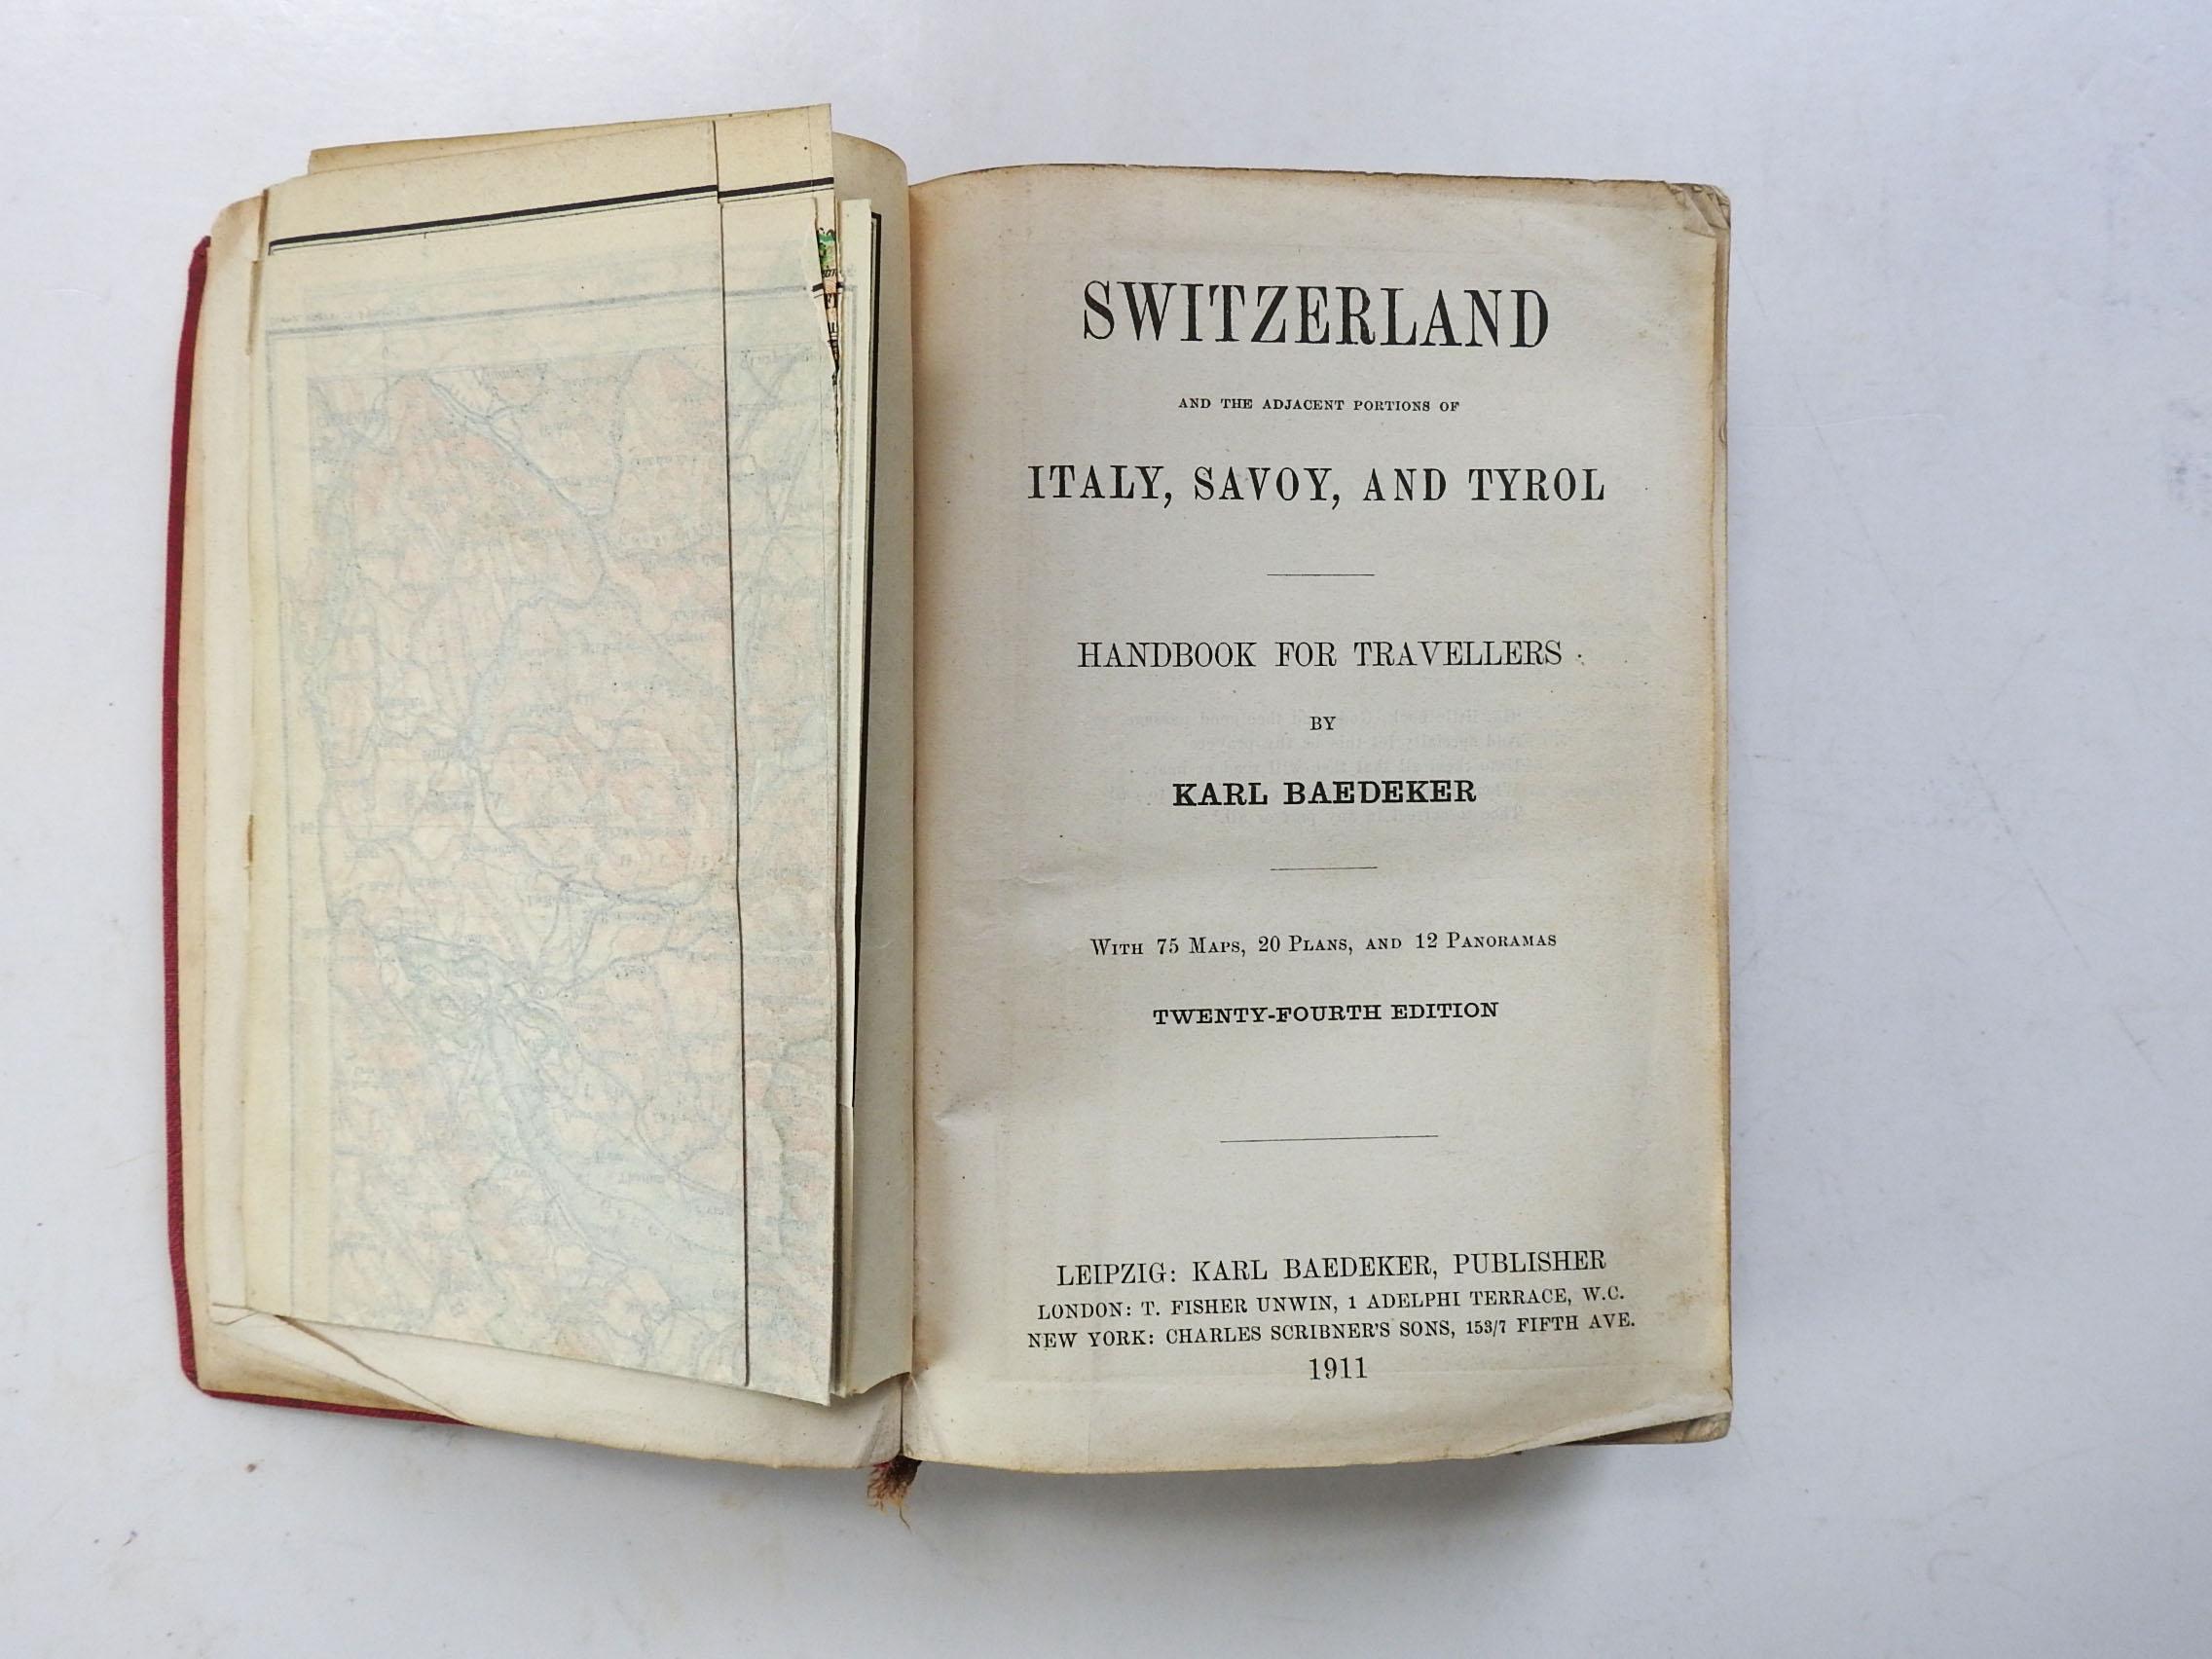 Baedeker's Switzerland. Handbook for travelers by Karl Baedeker. Published by Baedeker, Leipzig, 1911. Since the 1830's Baedeker set the standard for authoritative pocket guidebooks for tourists. Detailed information, sometimes rude and non PC